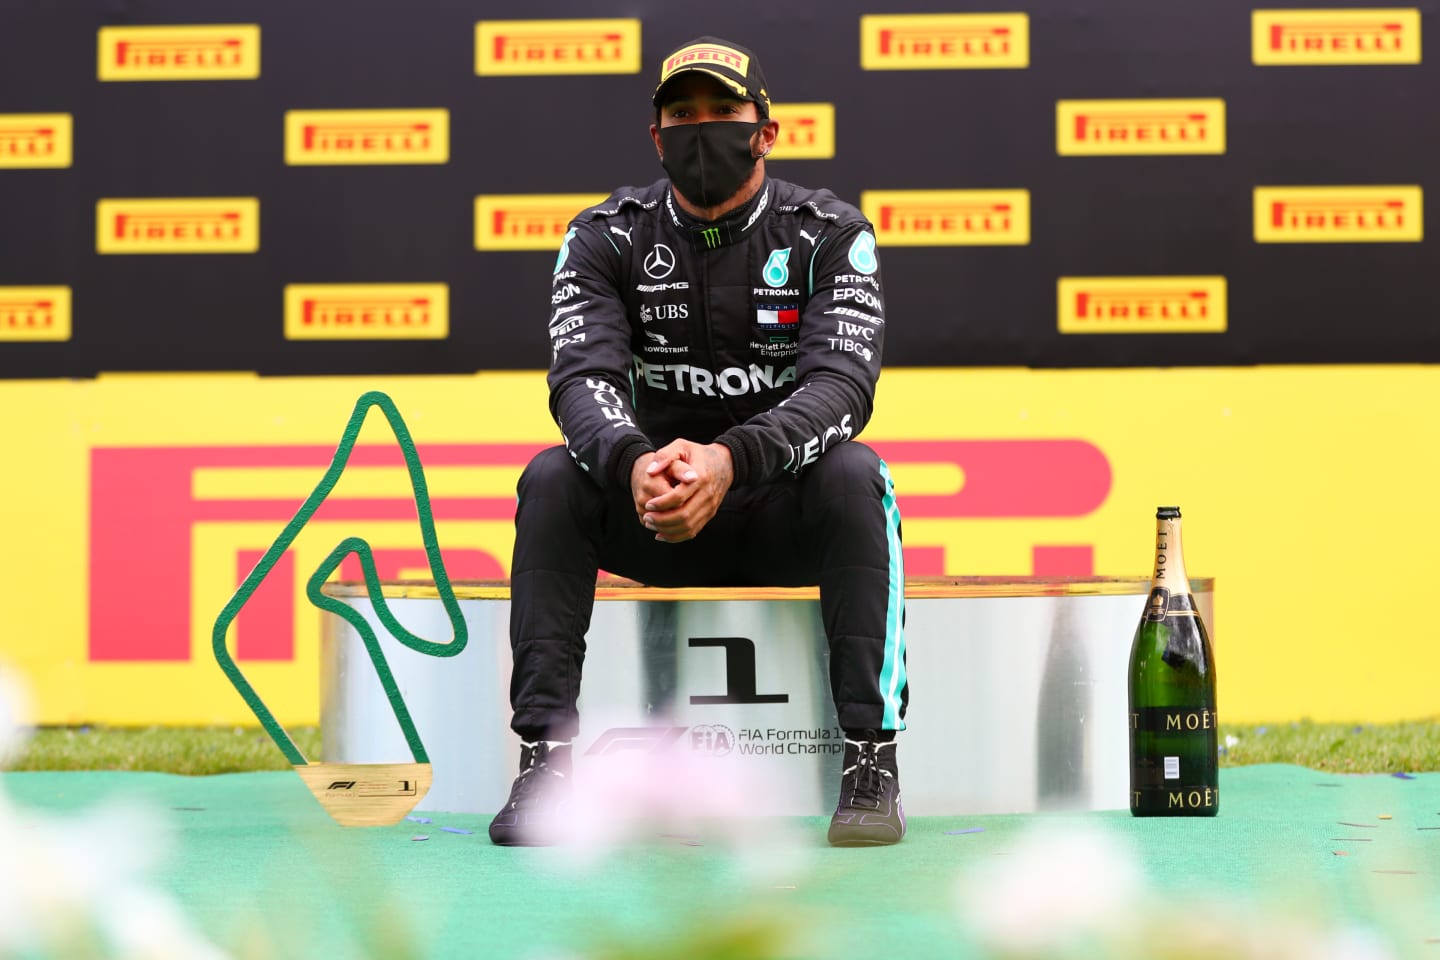 SPIELBERG, AUSTRIA - JULY 12: Race winner Lewis Hamilton of Great Britain and Mercedes GP celebrates on the podium during the Formula One Grand Prix of Styria at Red Bull Ring on July 12, 2020 in Spielberg, Austria. (Photo by Dan Istitene - Formula 1/Formula 1 via Getty Images)